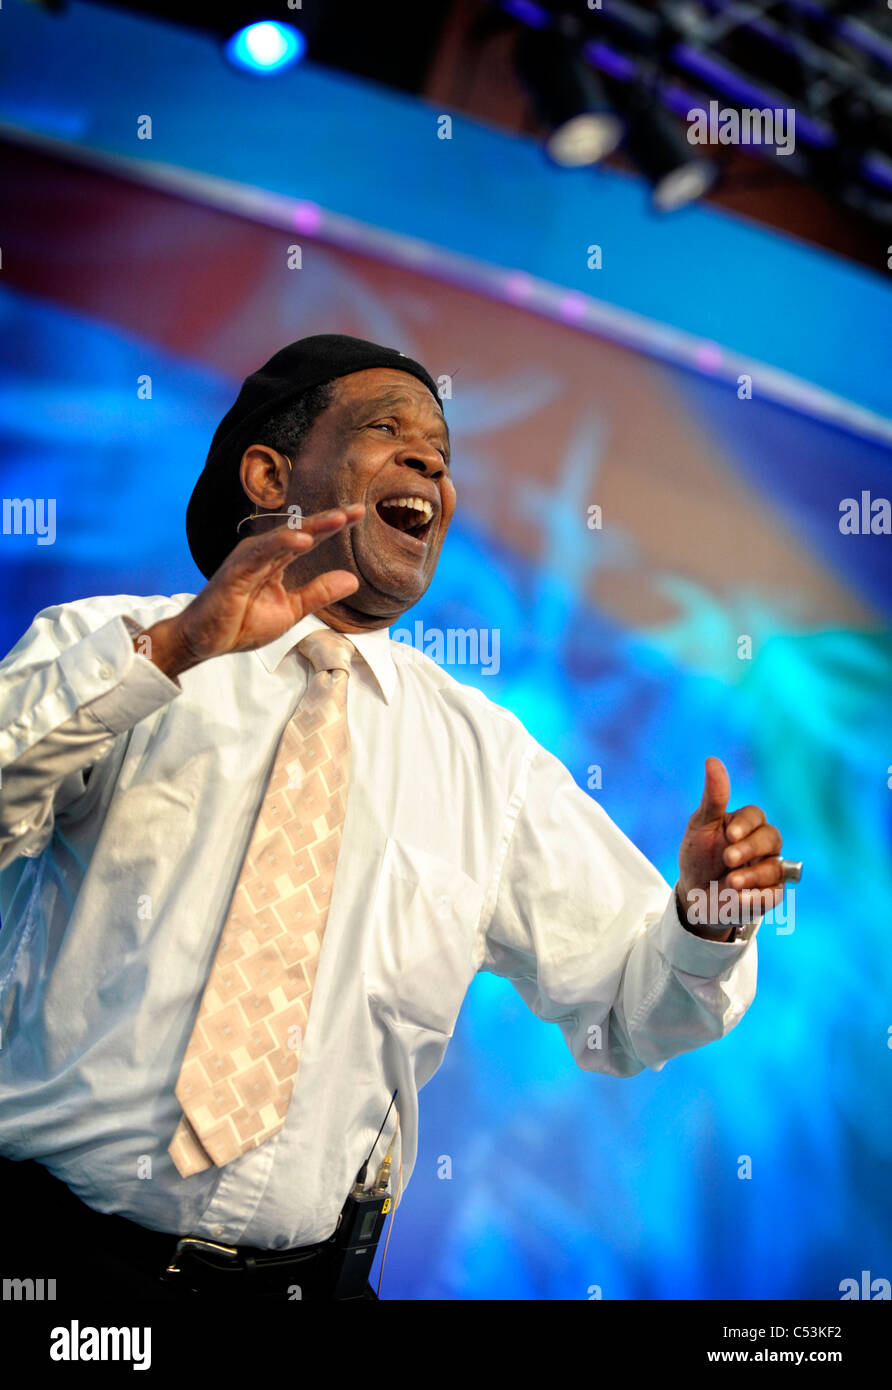 Alex Pascall MBE, founder of the Notting Hill Carnival, performs at the 2011 Llangollen International Musical Eisteddfod Stock Photo